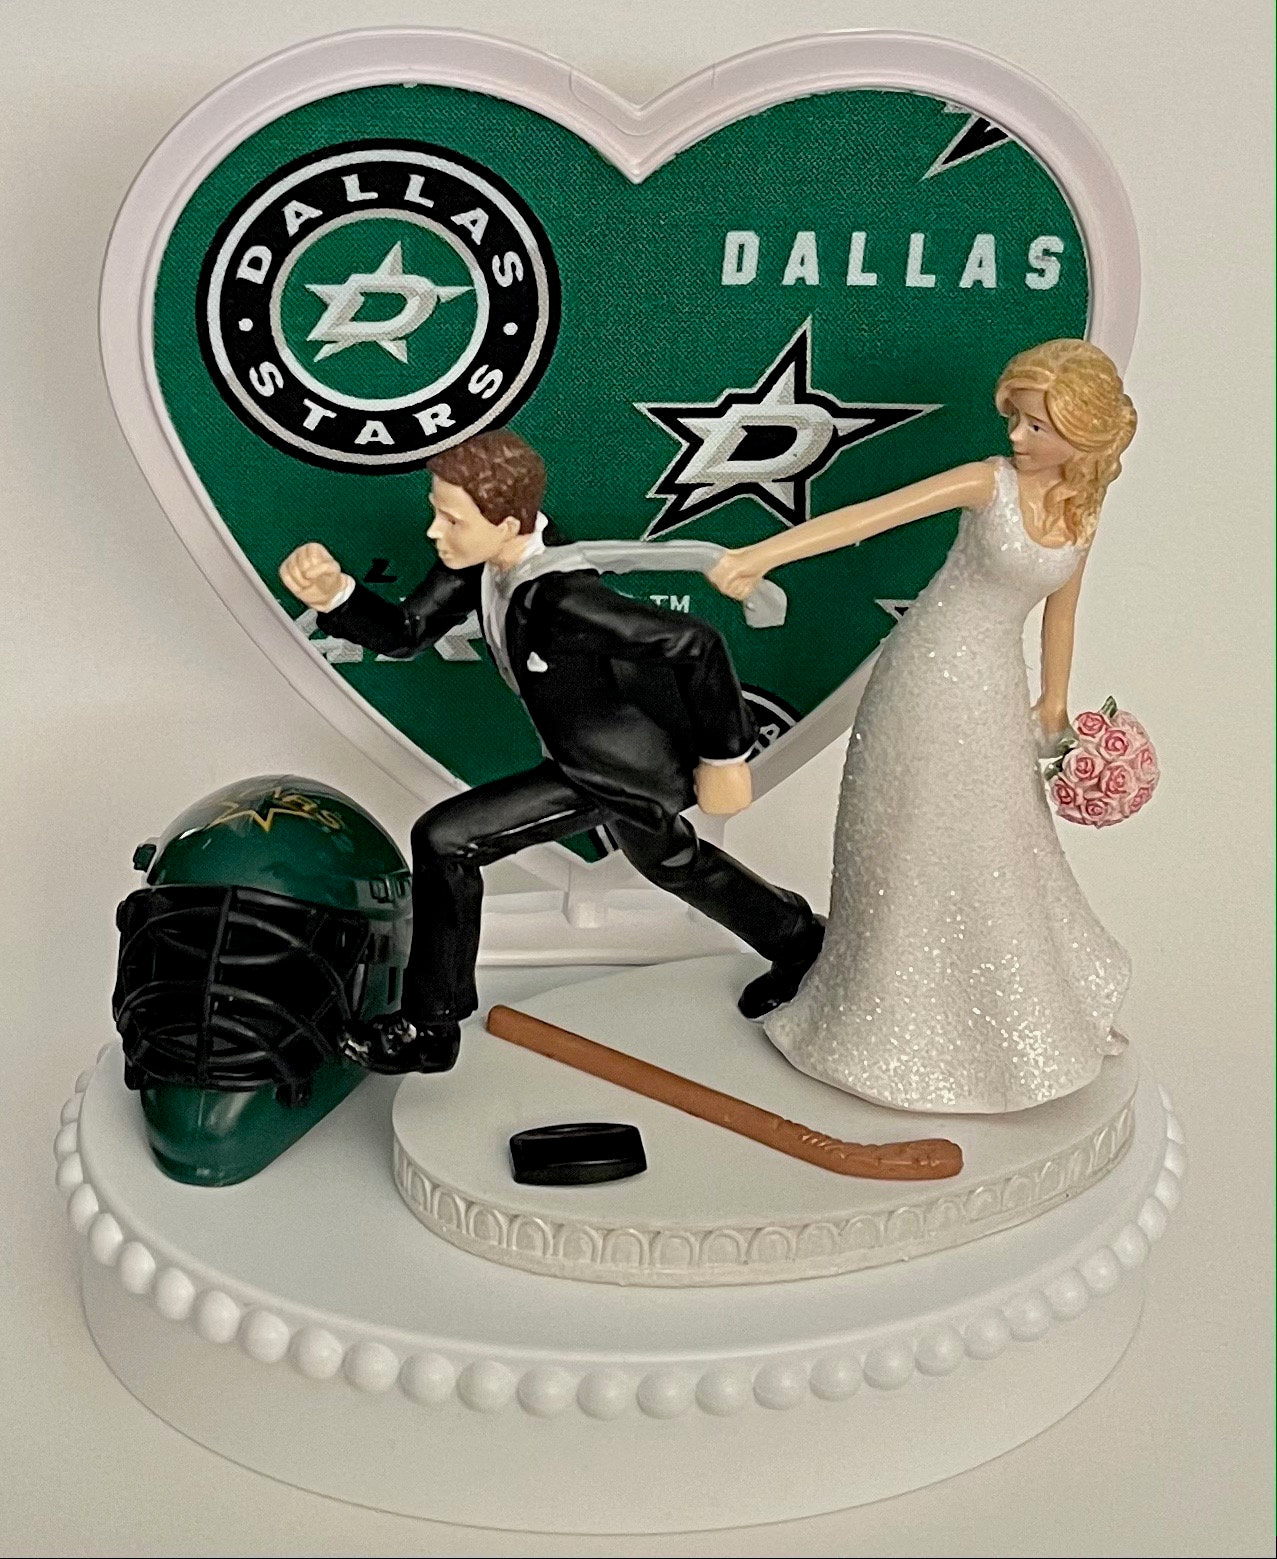 Wedding Cake Topper Dallas Stars Hockey Themed Running Funny Humorous Bride Groom Unique Sports Fans Reception Fun Groom's Cake Top Gift